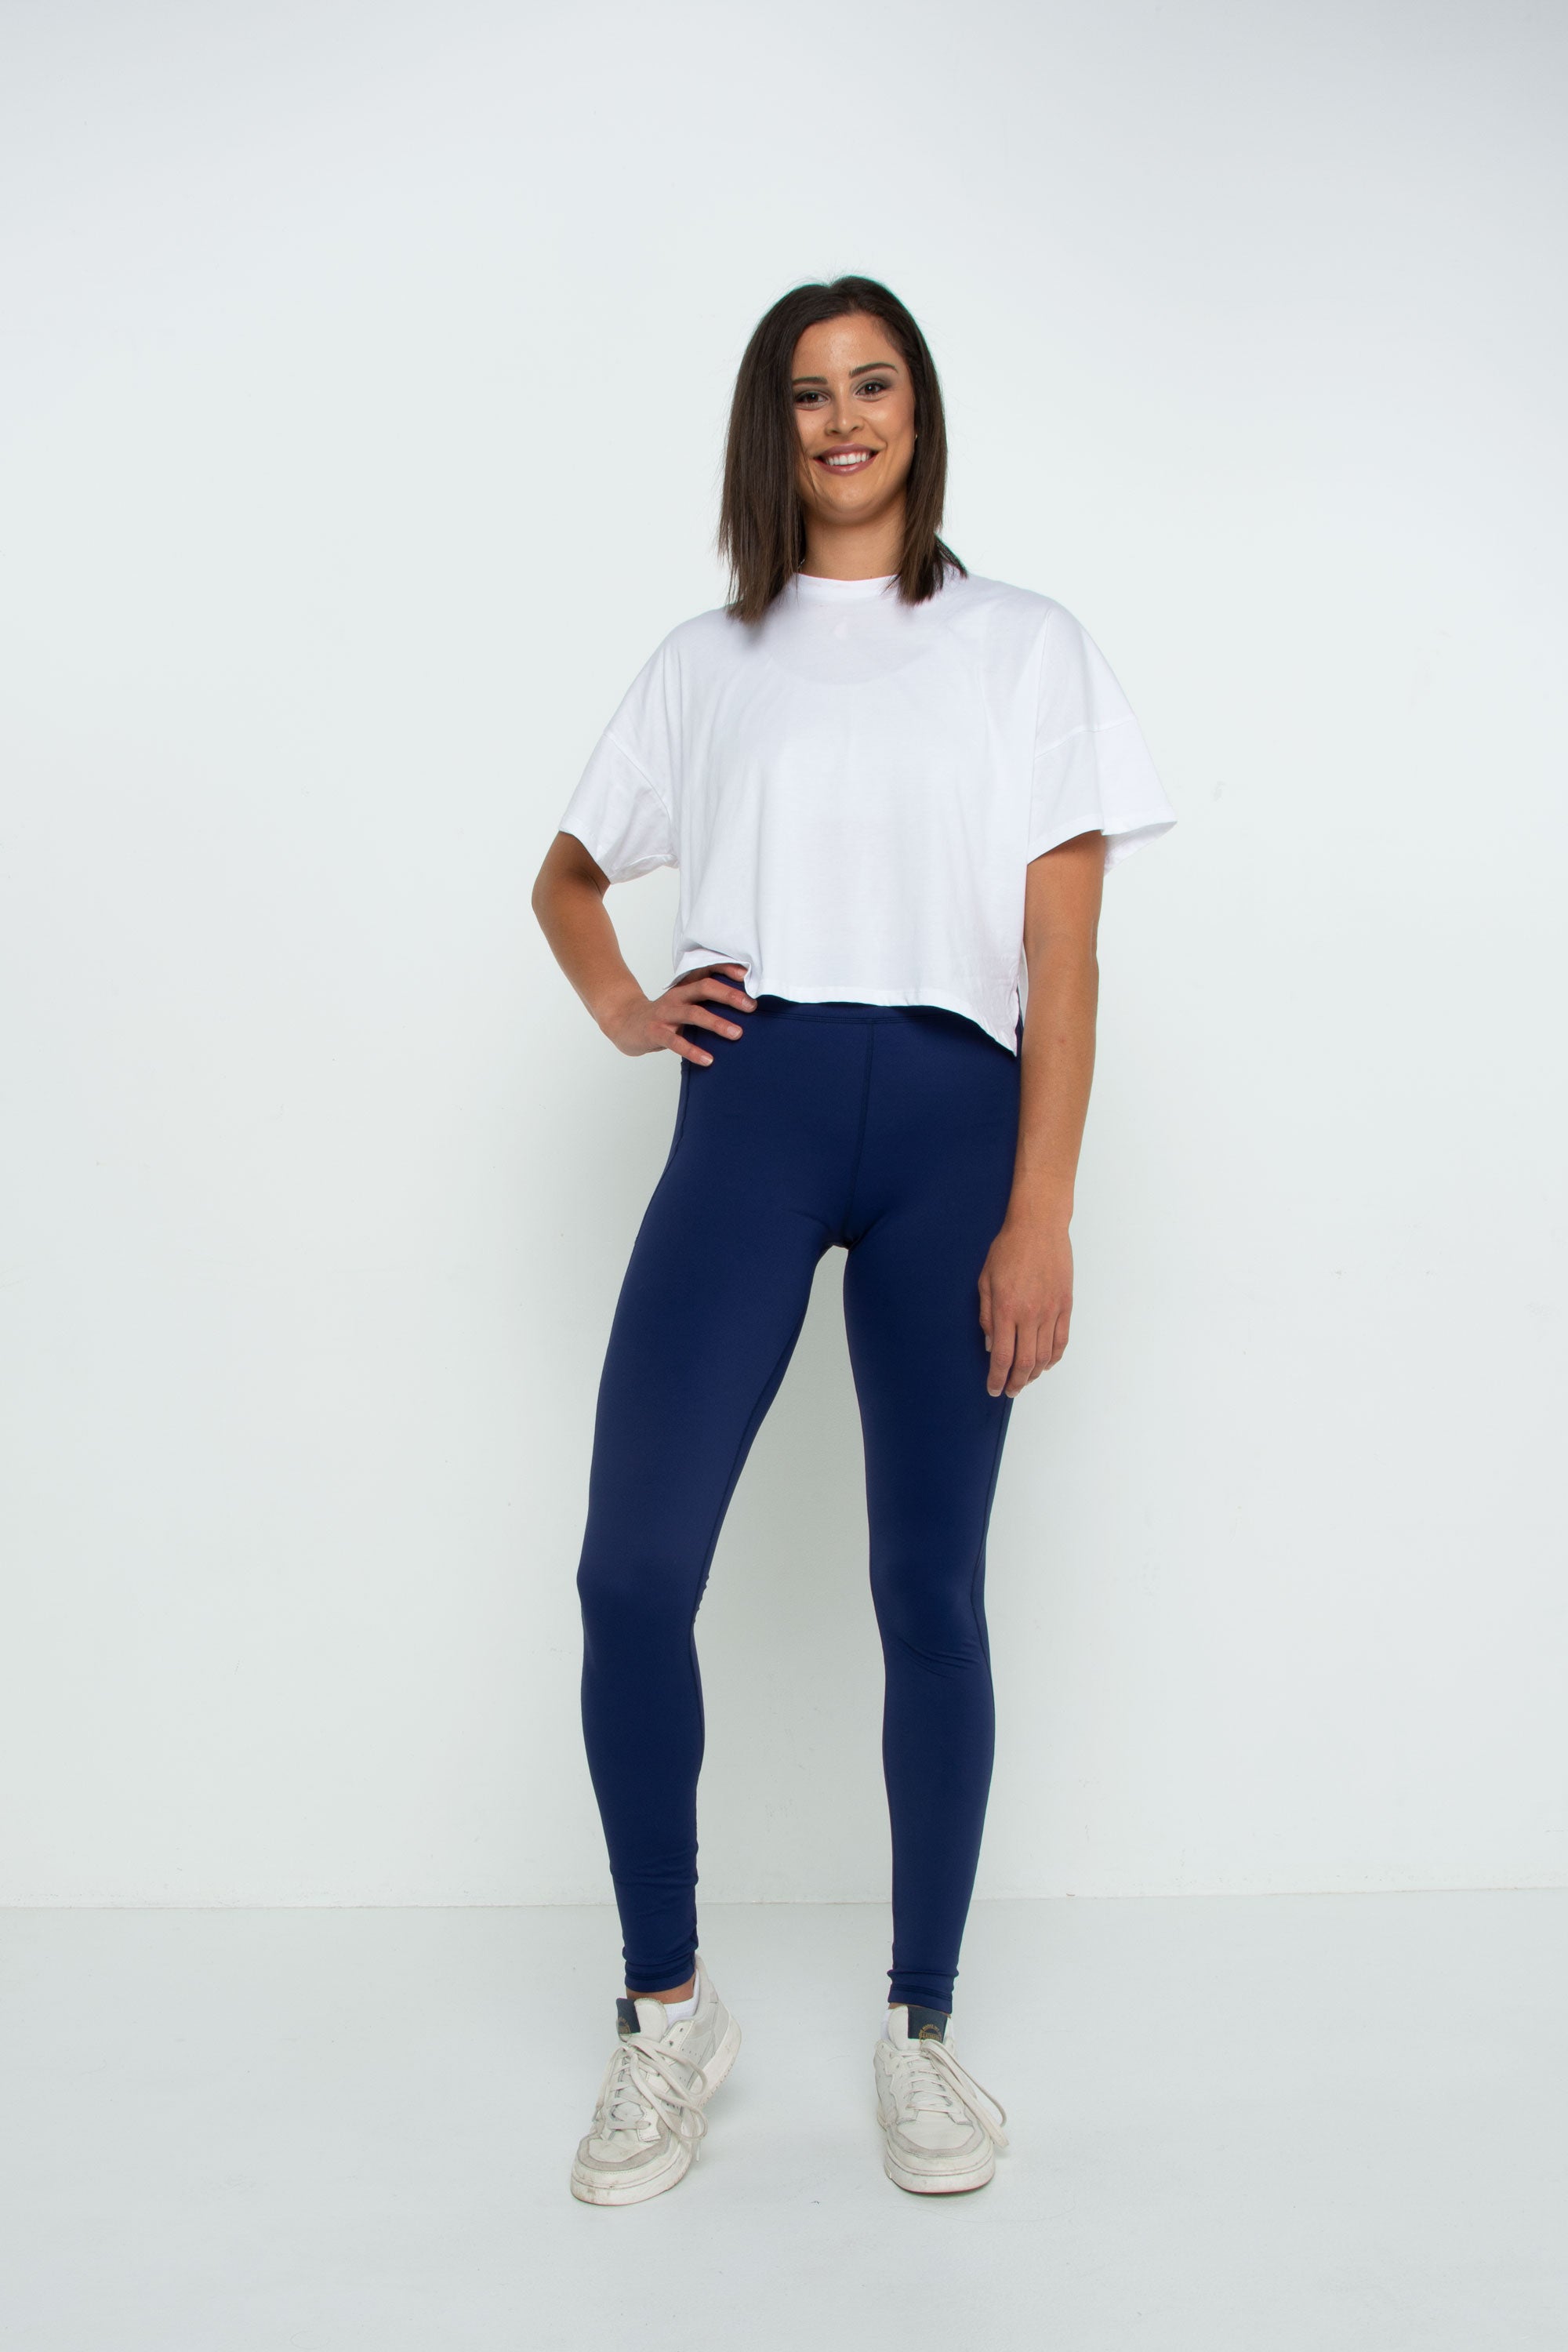 Extra Long Navy Stretch Leggings  Made For Tall Women - HEIGHT-OF-FASHION